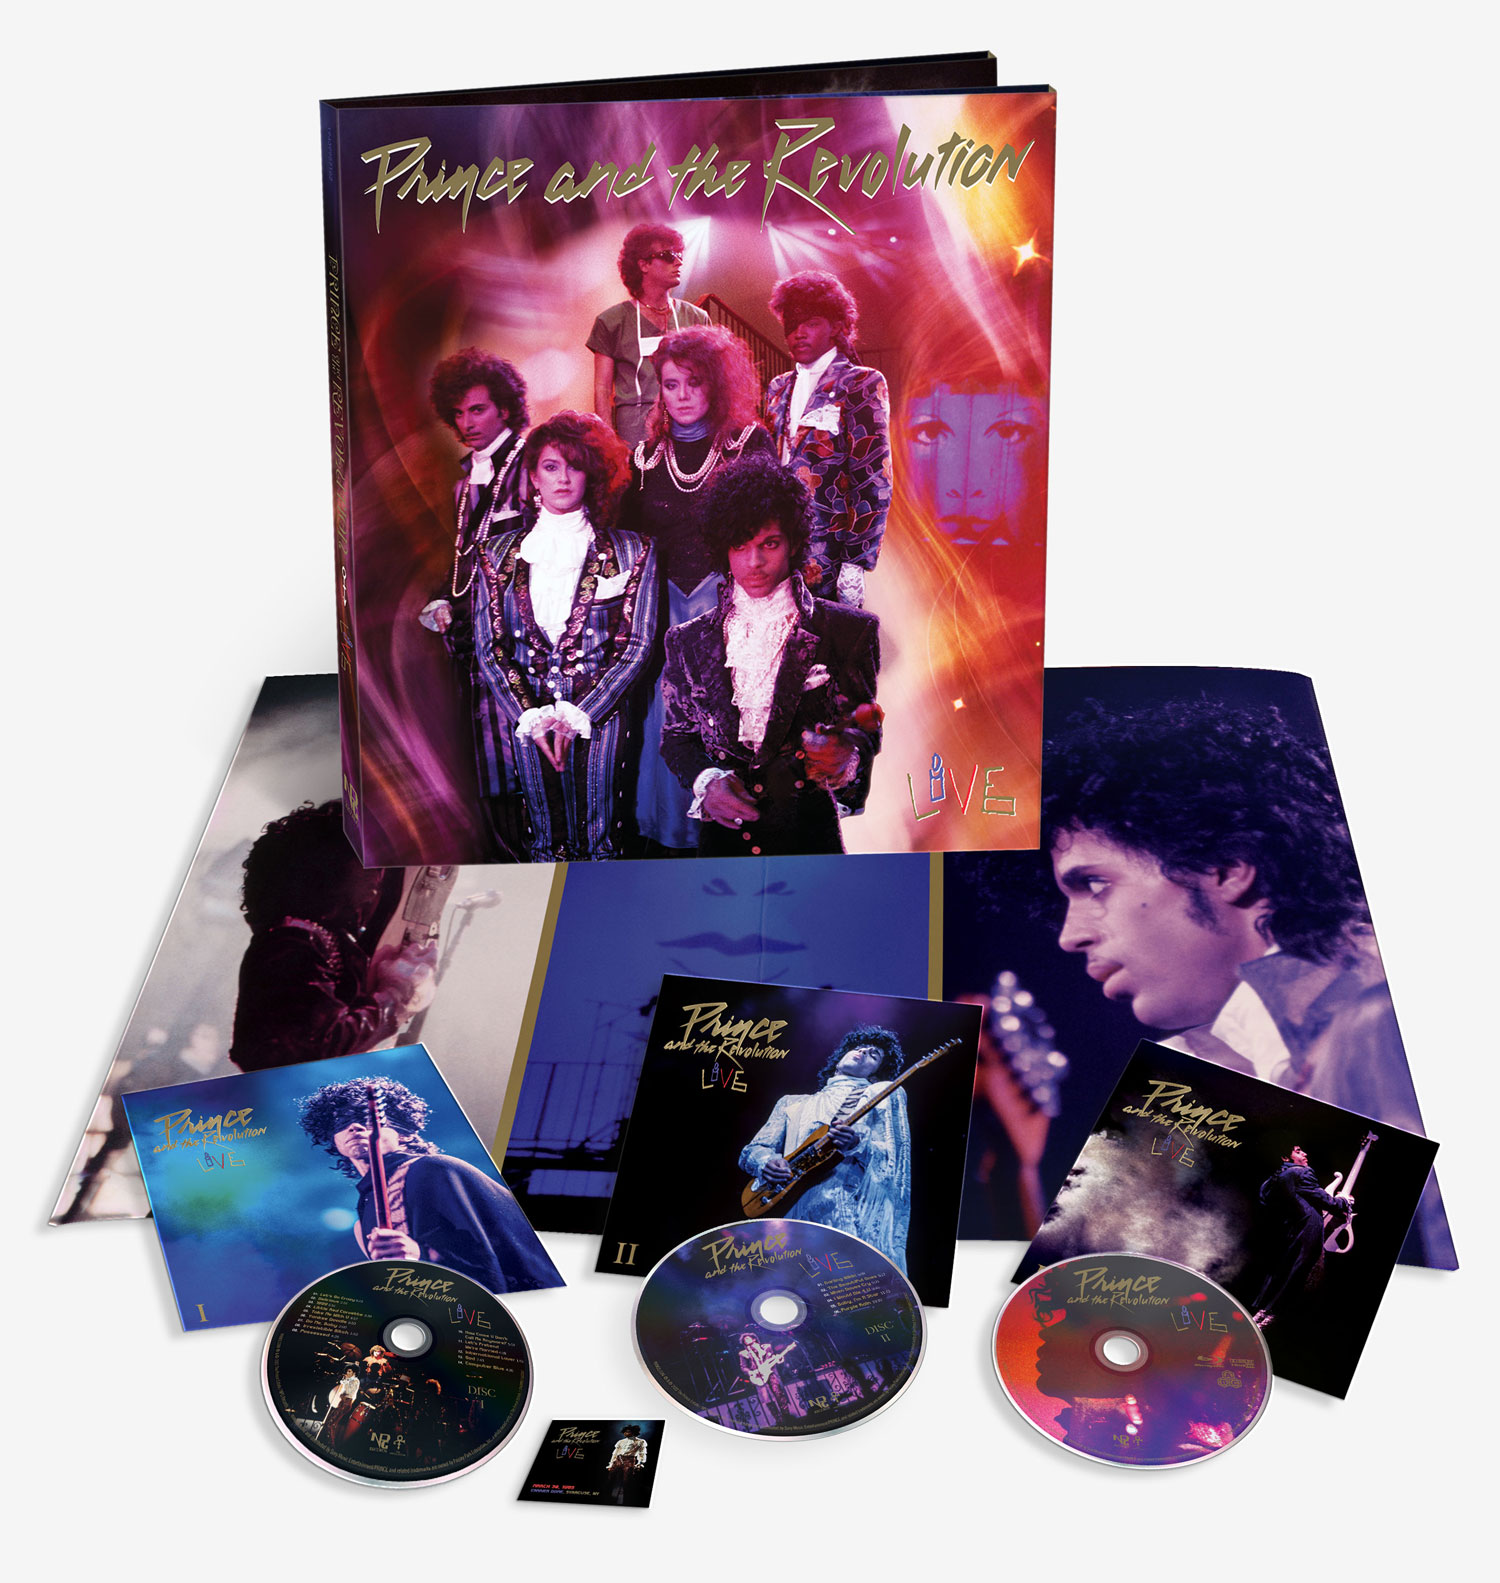 Prince and the Revolution Live / new official box set – SuperDeluxeEdition